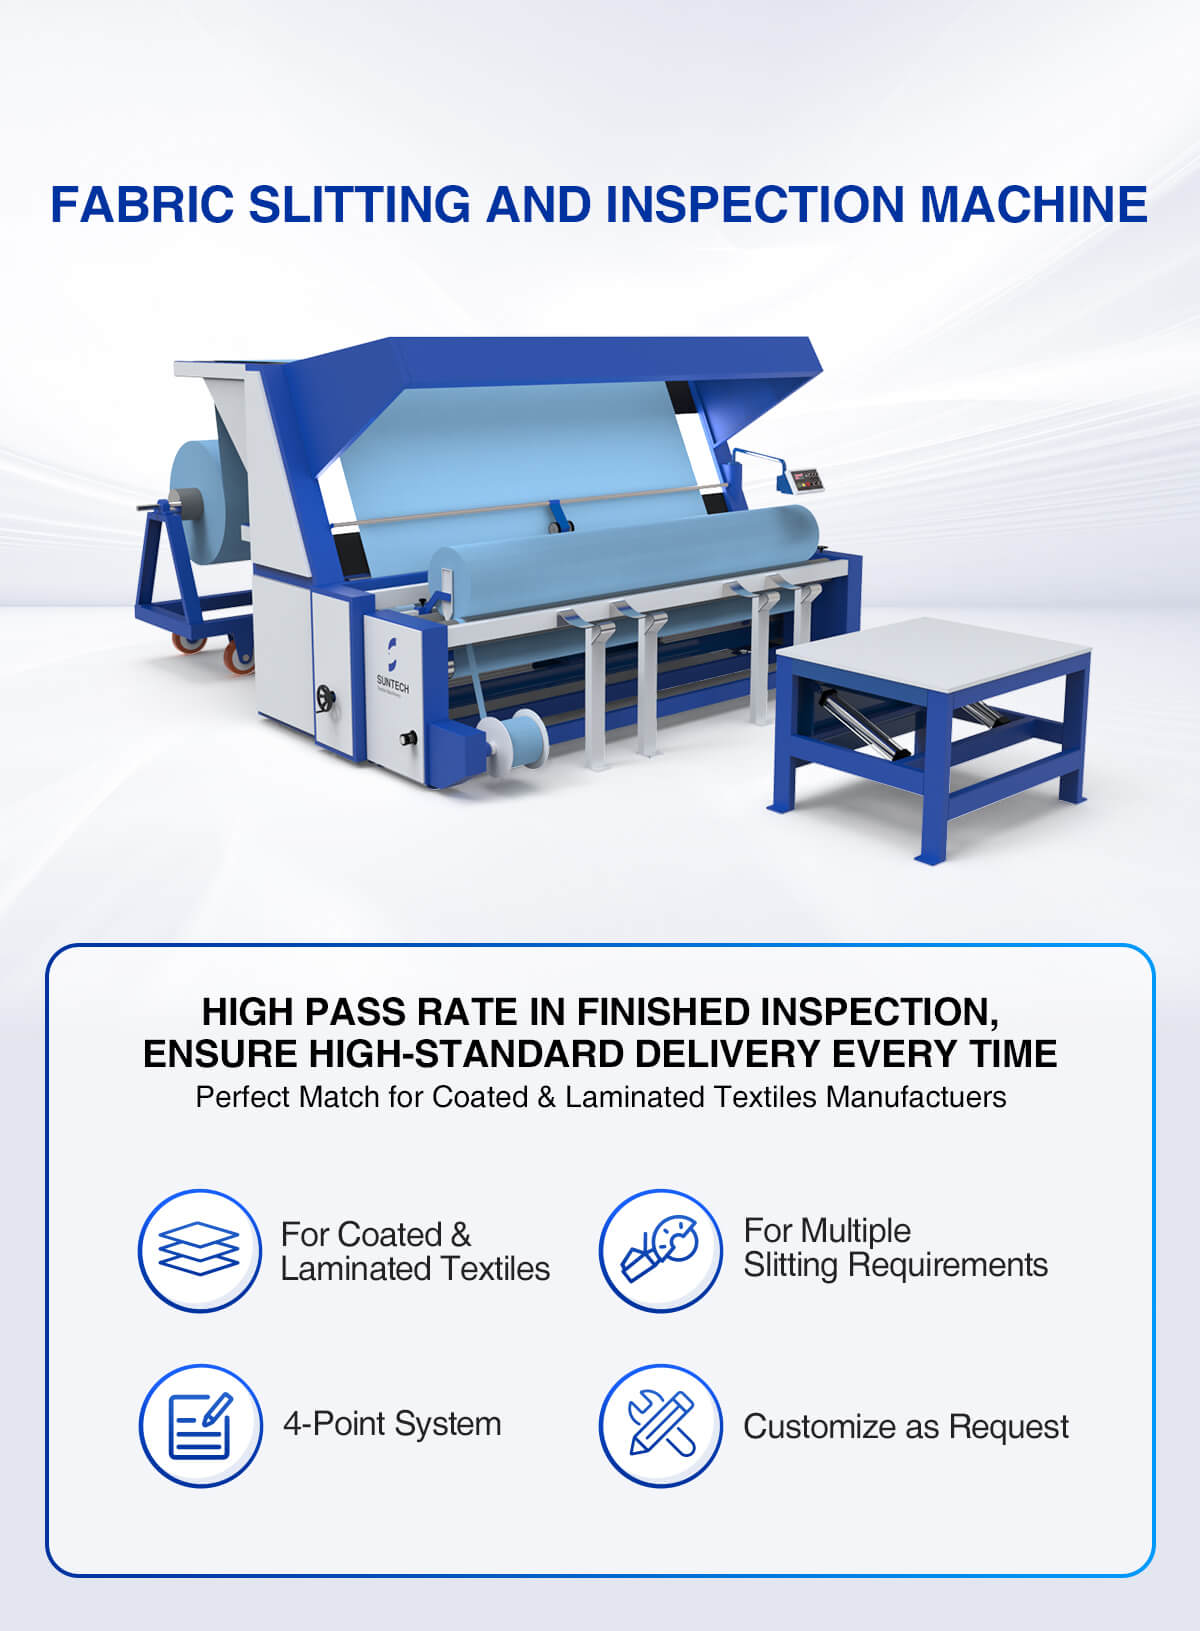 fabric slitting and inspection machine features